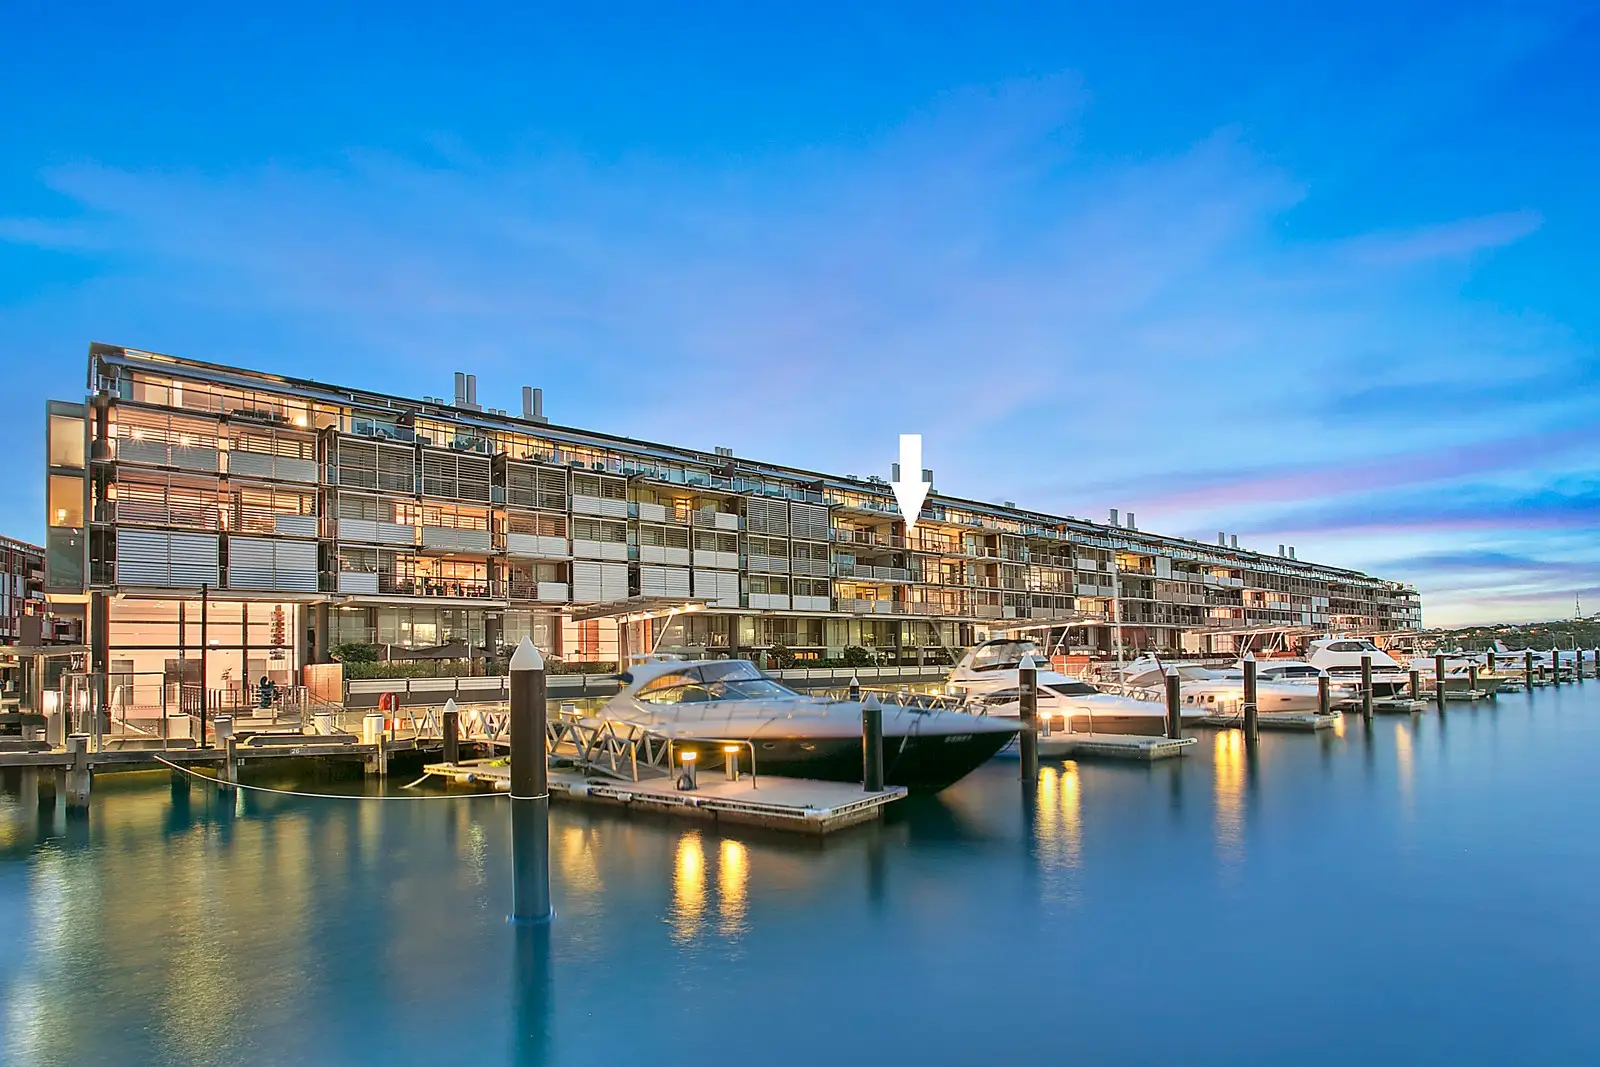 Photo #3: 511/19 Hickson Road, Walsh Bay - Sold by Sydney Sotheby's International Realty